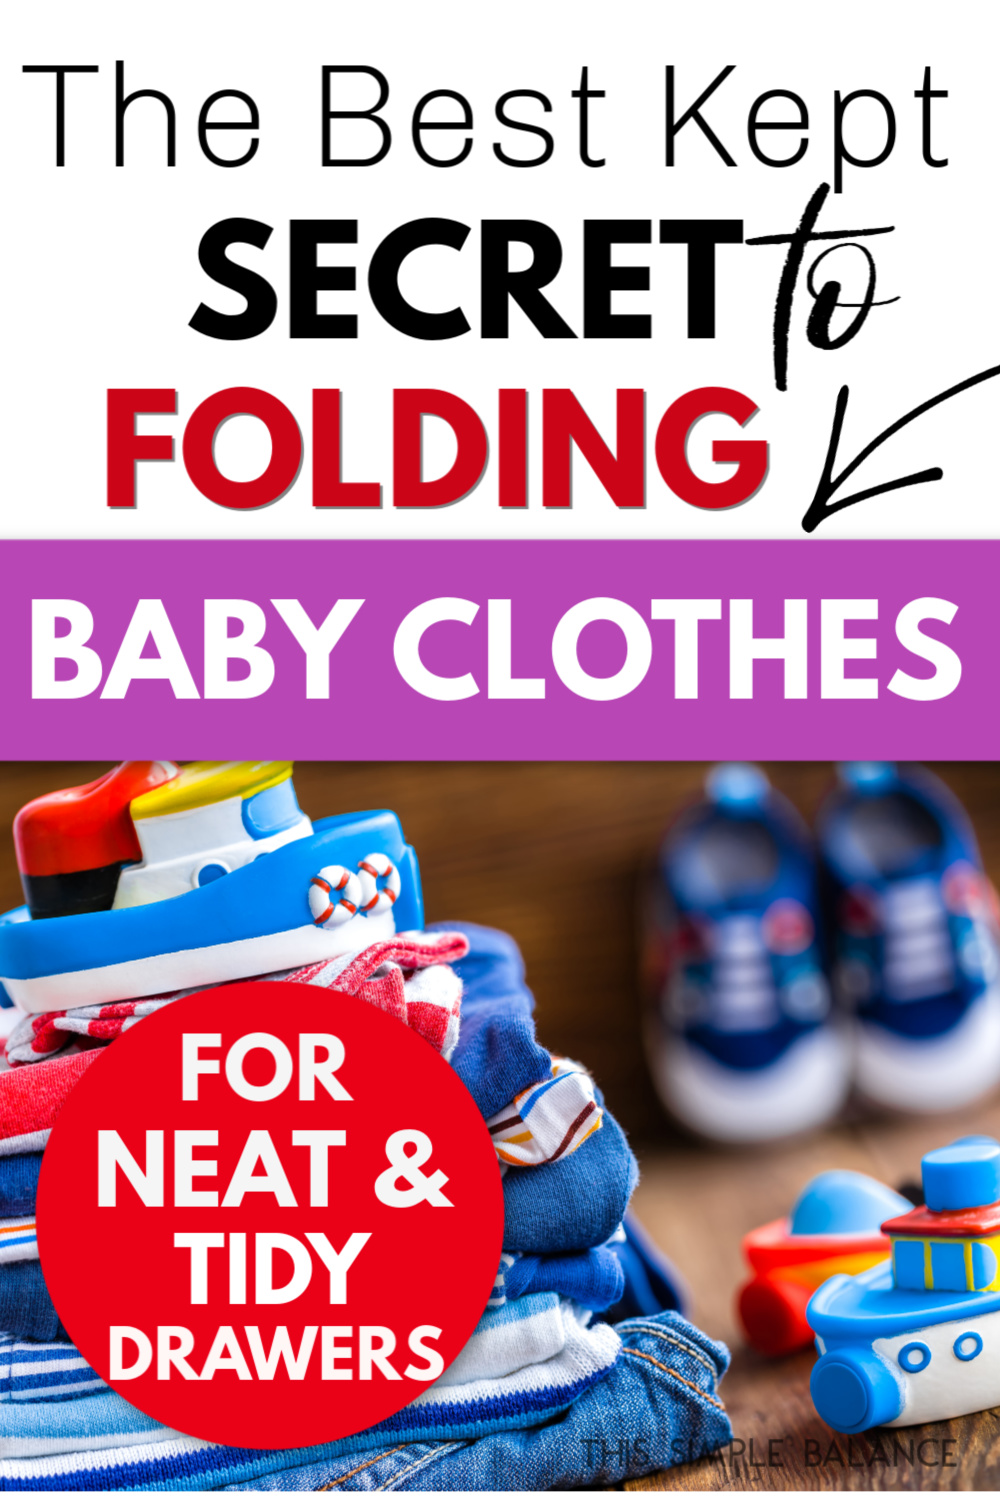 folded baby clothes and toy boats, with text overlay, "the best kept secret to folding baby clothes for neat & tidy drawers"